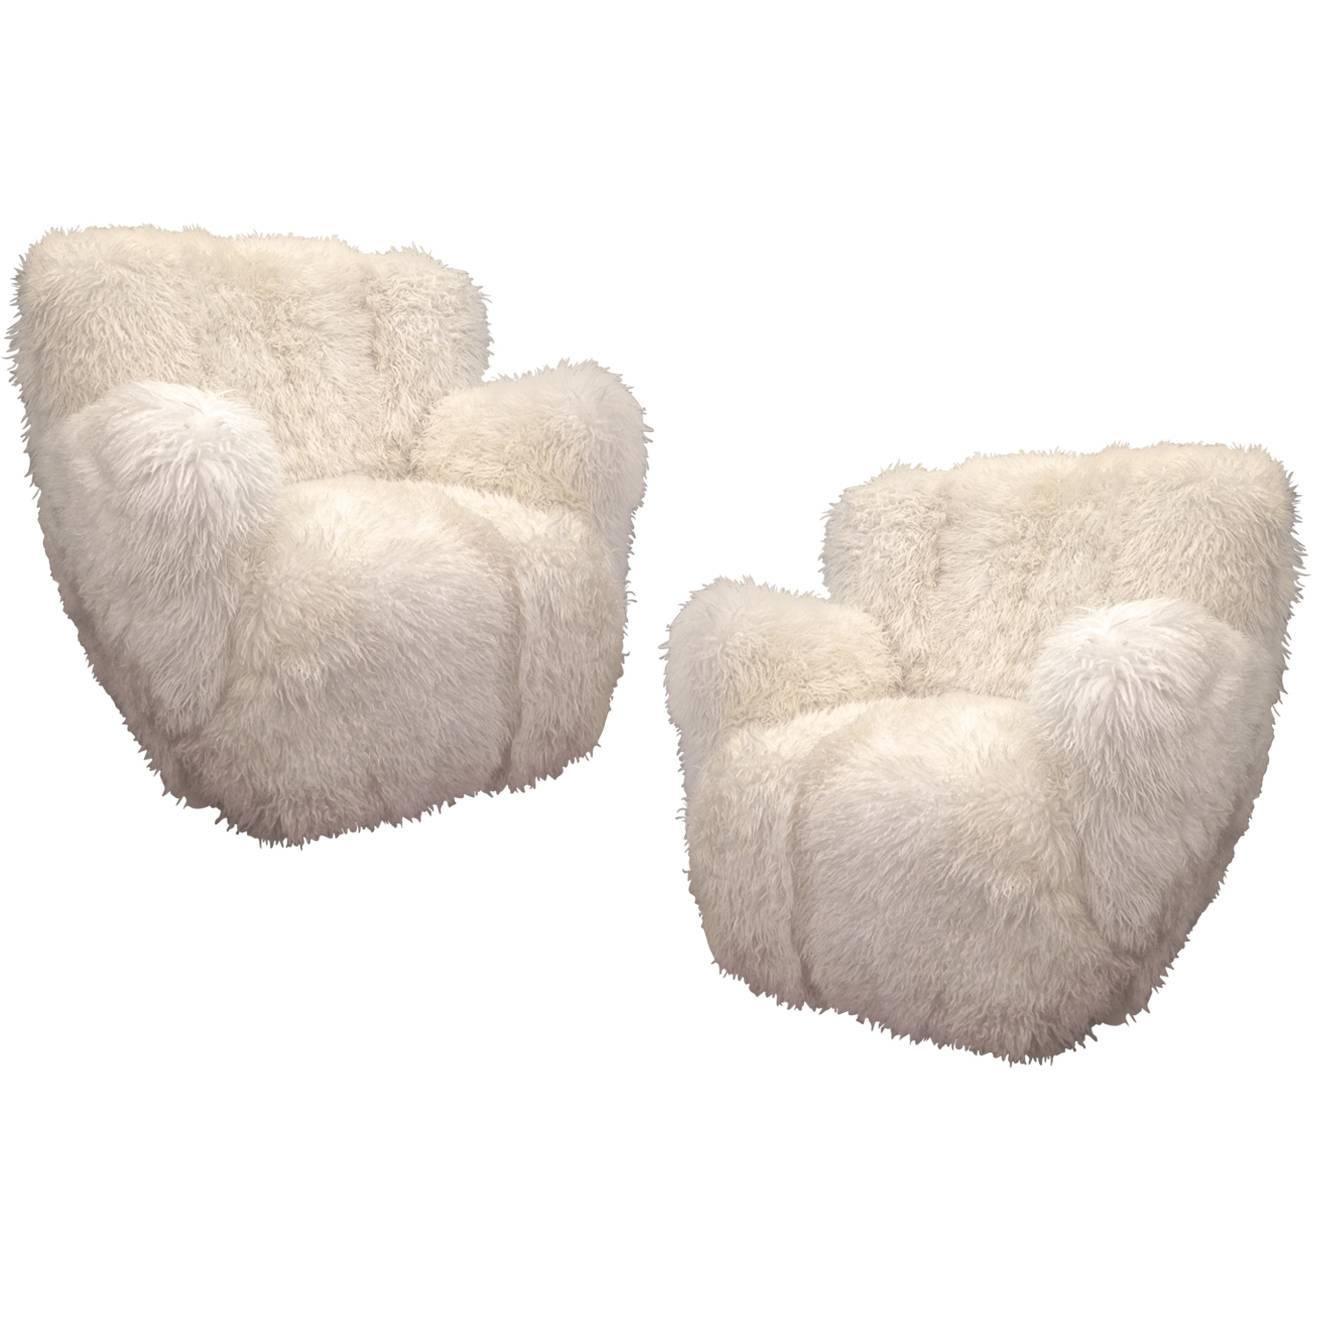 Viggo Boesen Pair of Hairy Club Chairs Covered in Sheep Skin Fur For Sale